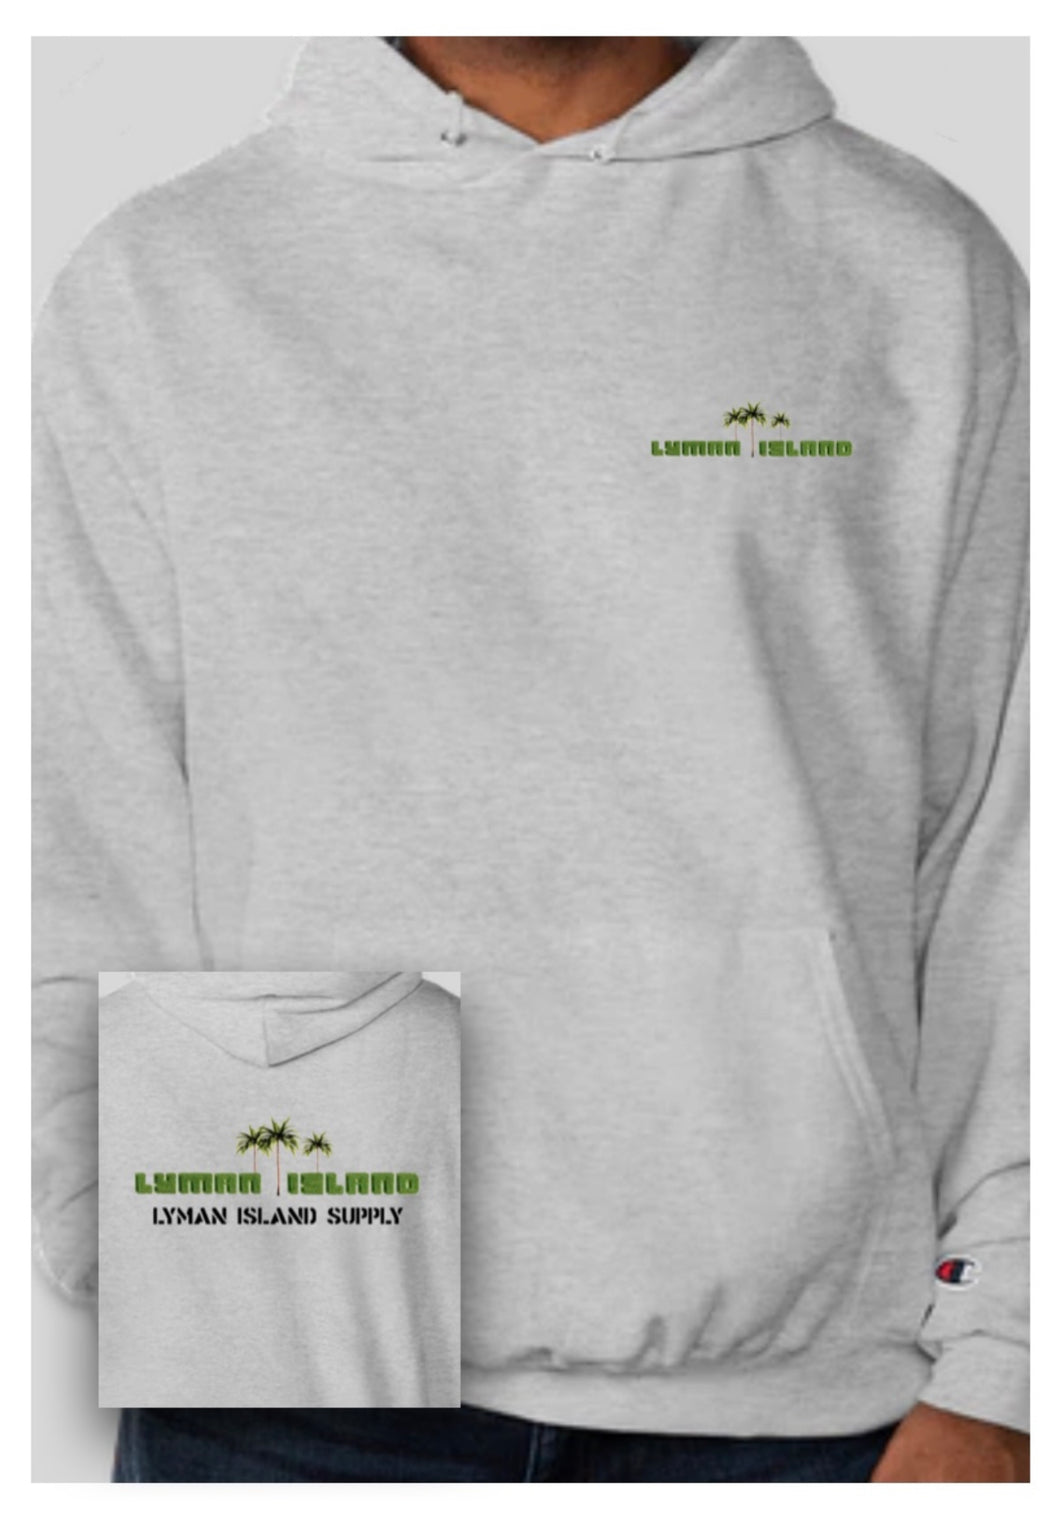 The Lyman Island Champions Hoodie (Promo code FREE2K with $2000+ purchase)